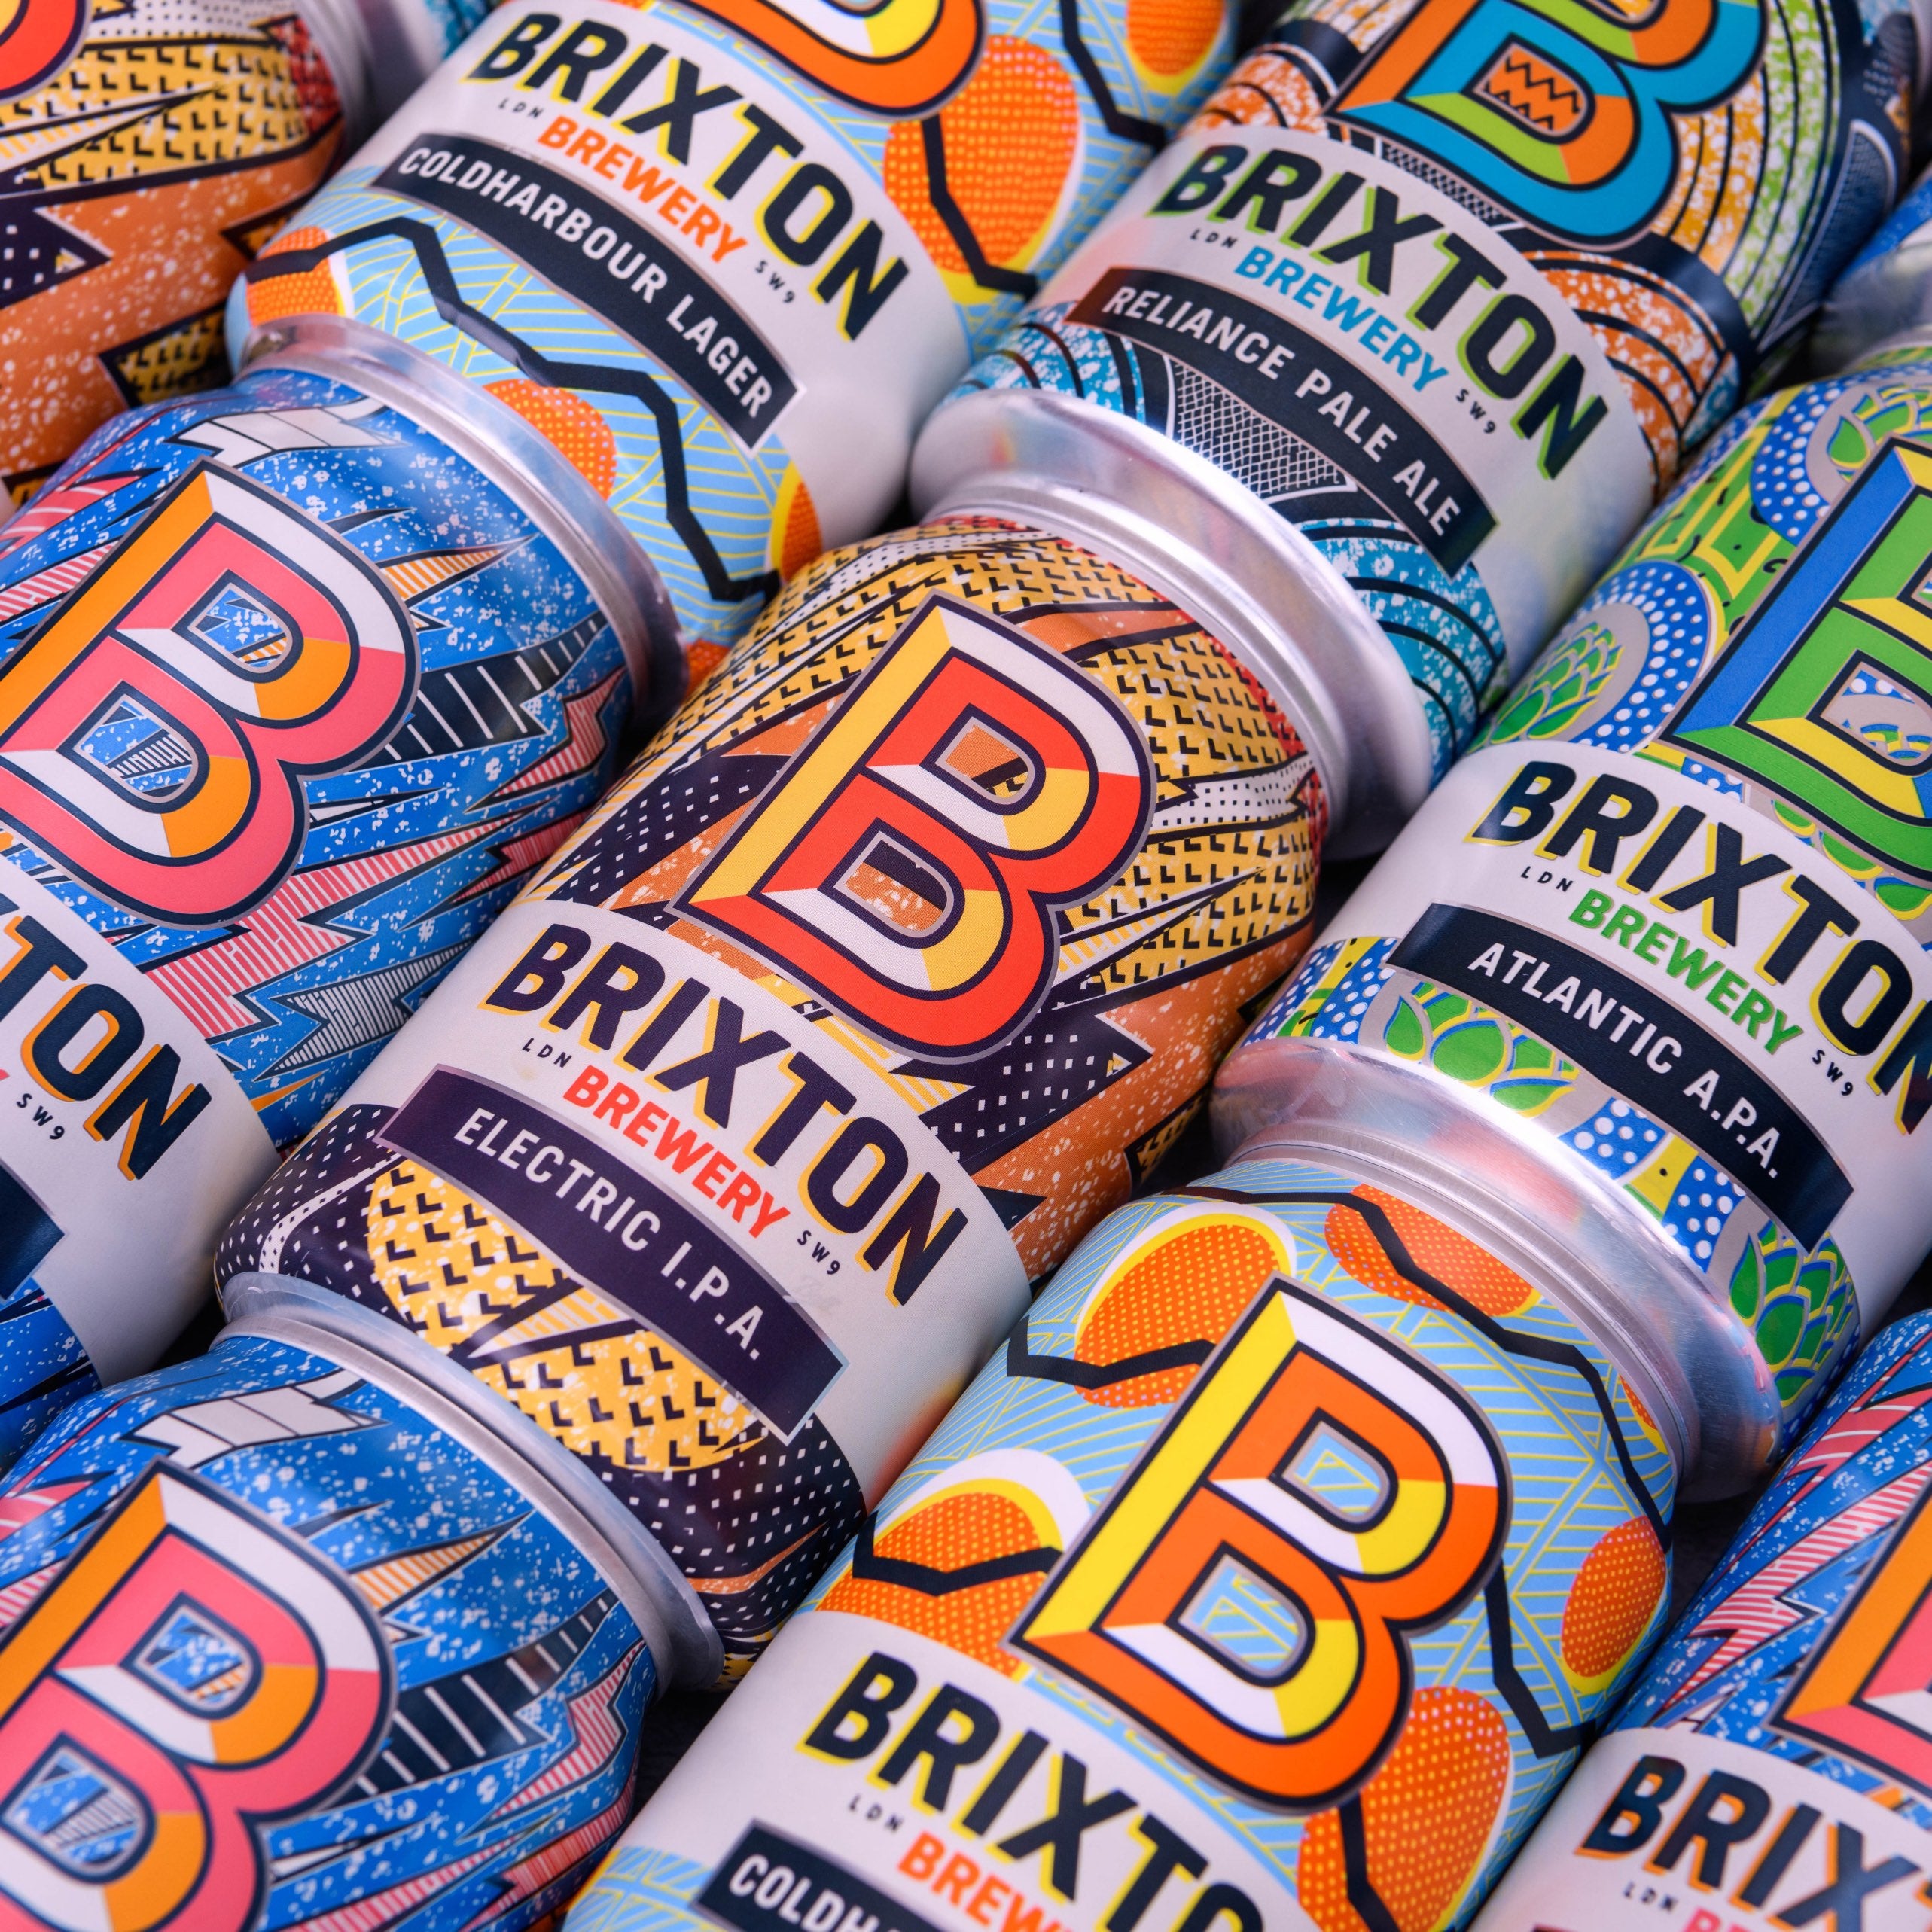 Welcome to Brixton Brewery